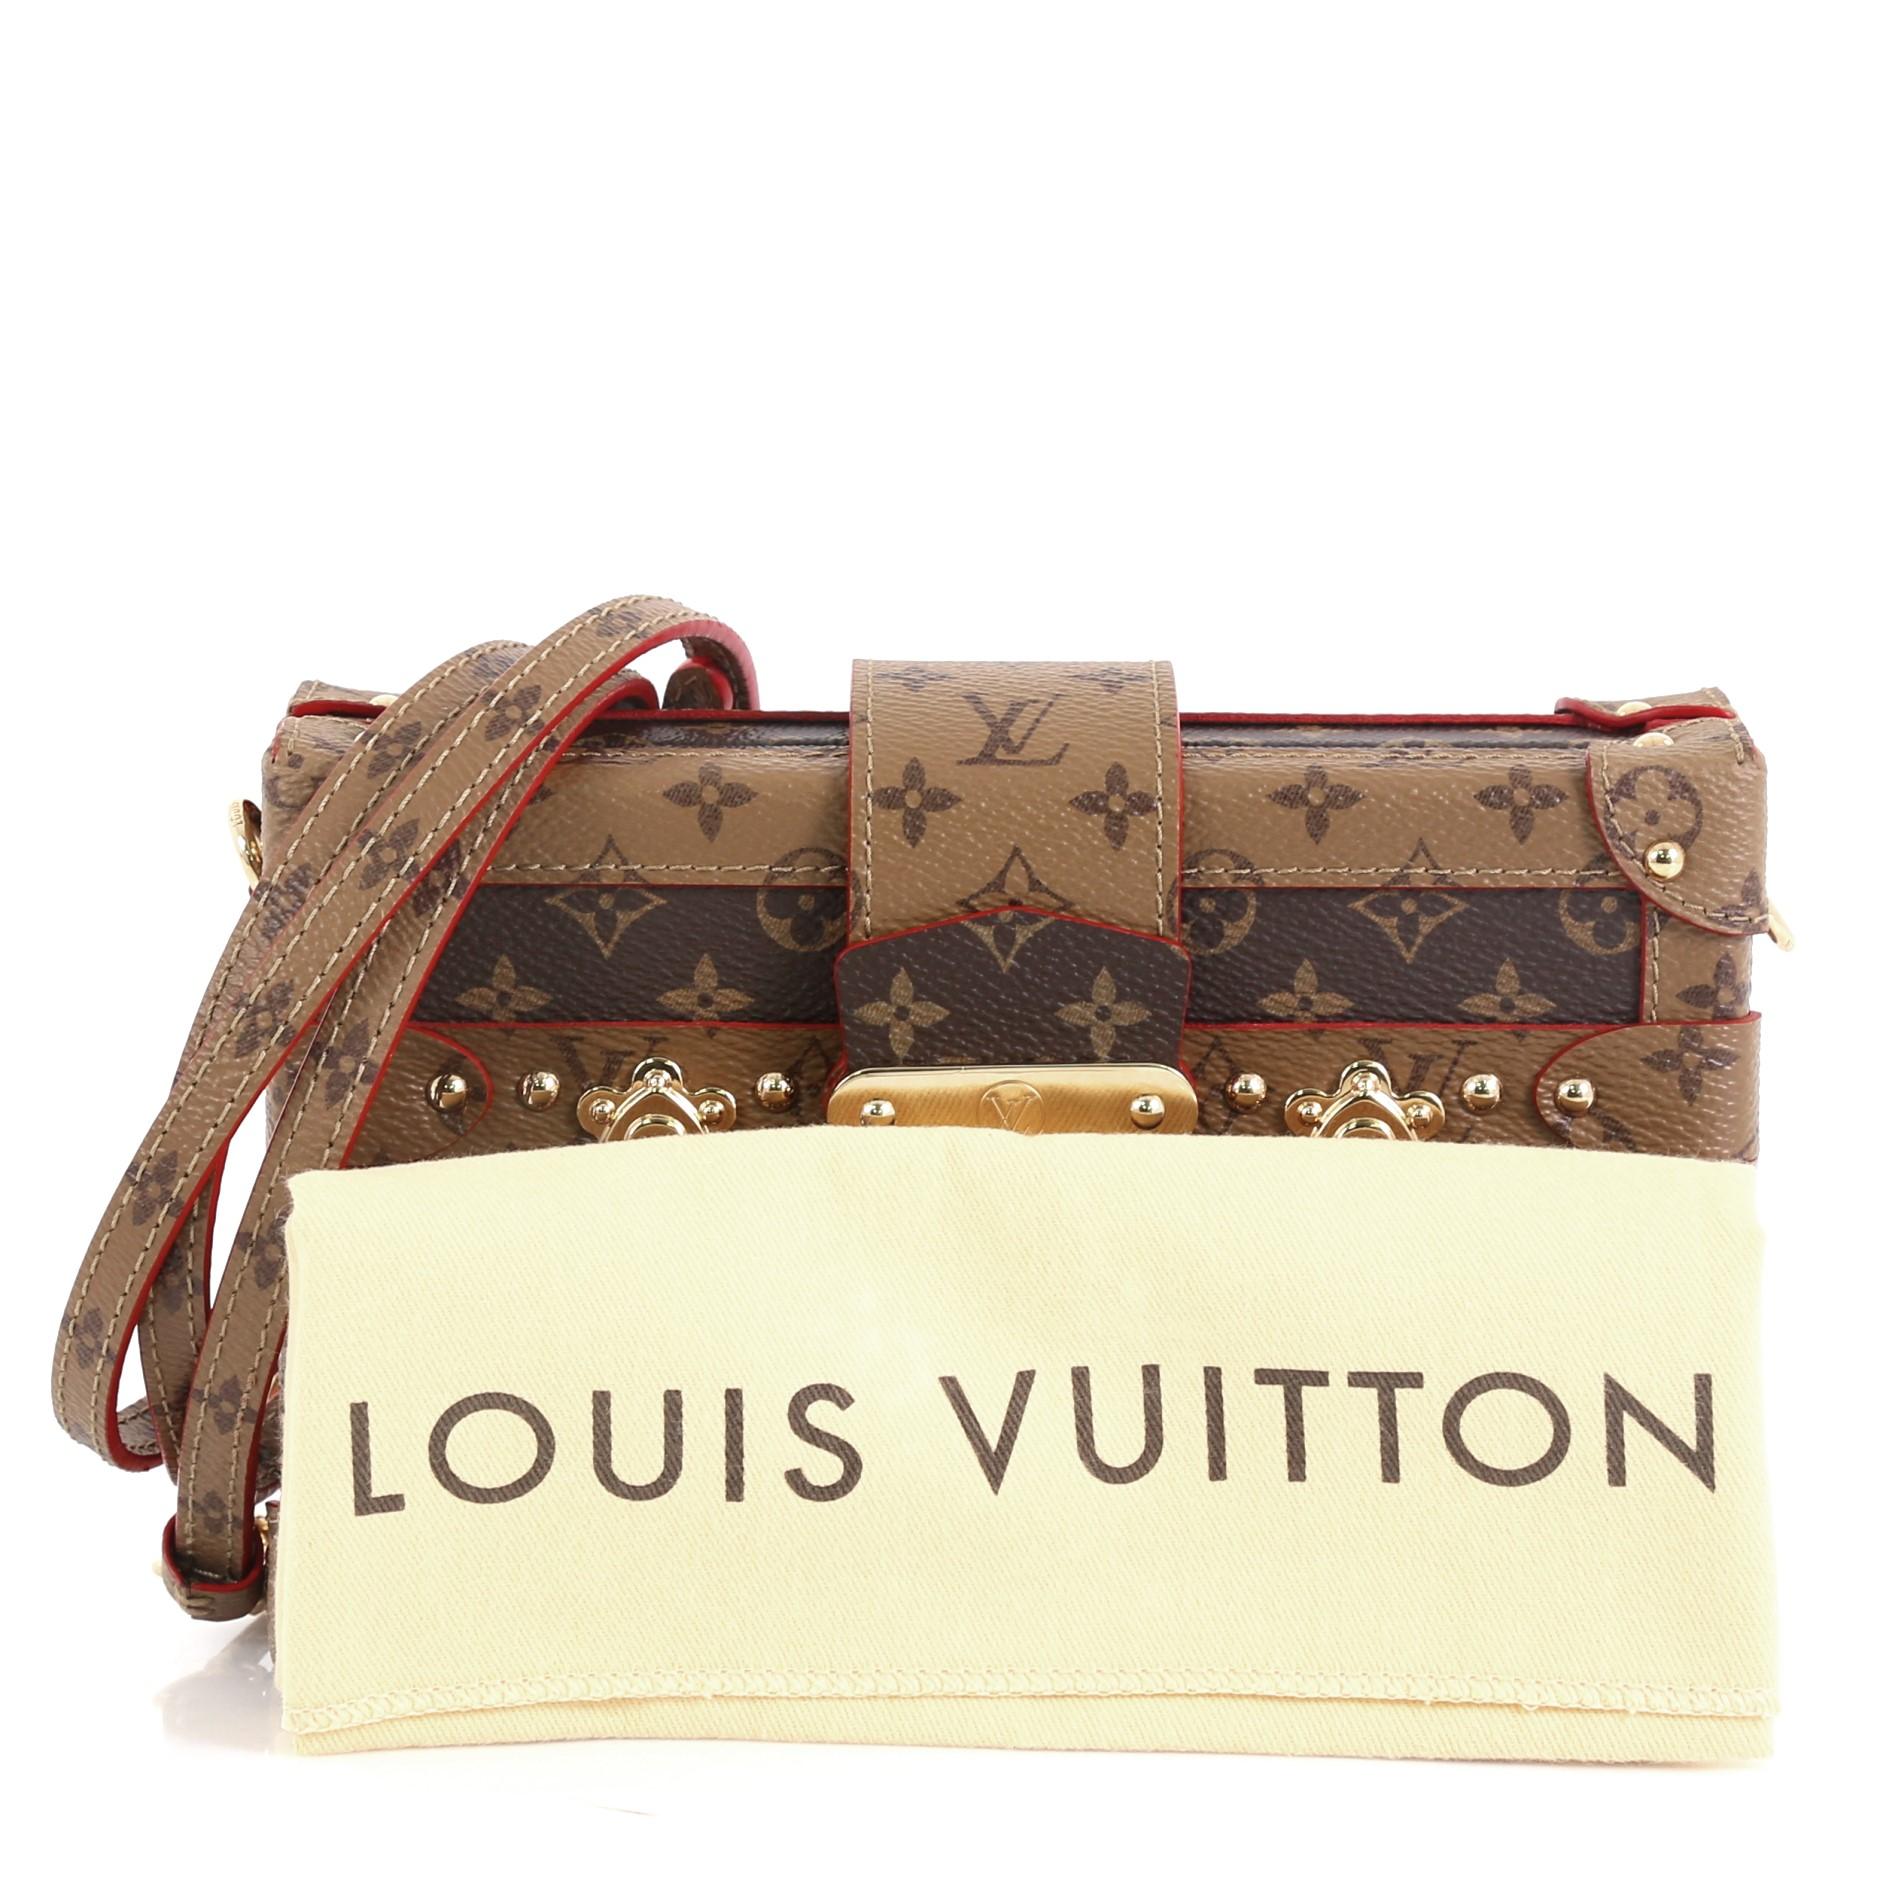 
This Louis Vuitton Petite Malle Handbag Reverse Monogram Canvas, crafted from brown reverse monogram coated canvas, features the signature three red crosses and gold-tone hardware. Its S-lock closure opens to a neutral leather interior with side